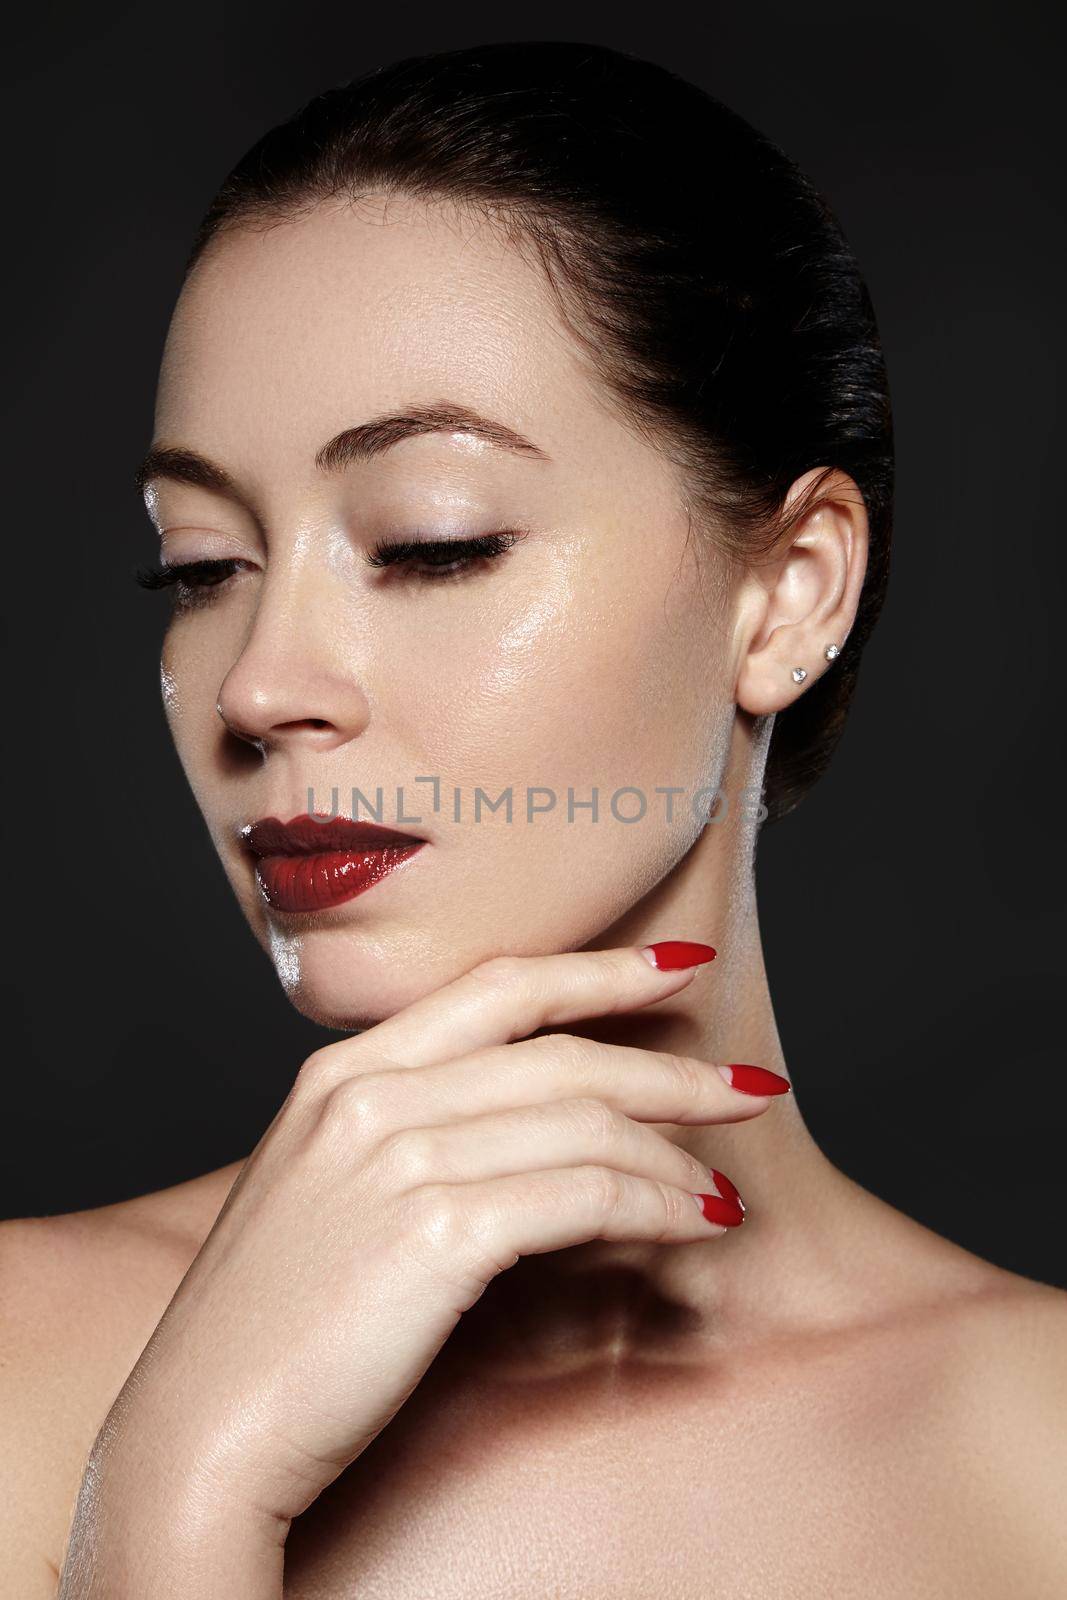 Luxury woman style vamp. Cosmetics, manicure on nails with bright red polish. Dark red lips make-up and nail color. Beauty close-up portrait of female model with red lipstick and clean skin